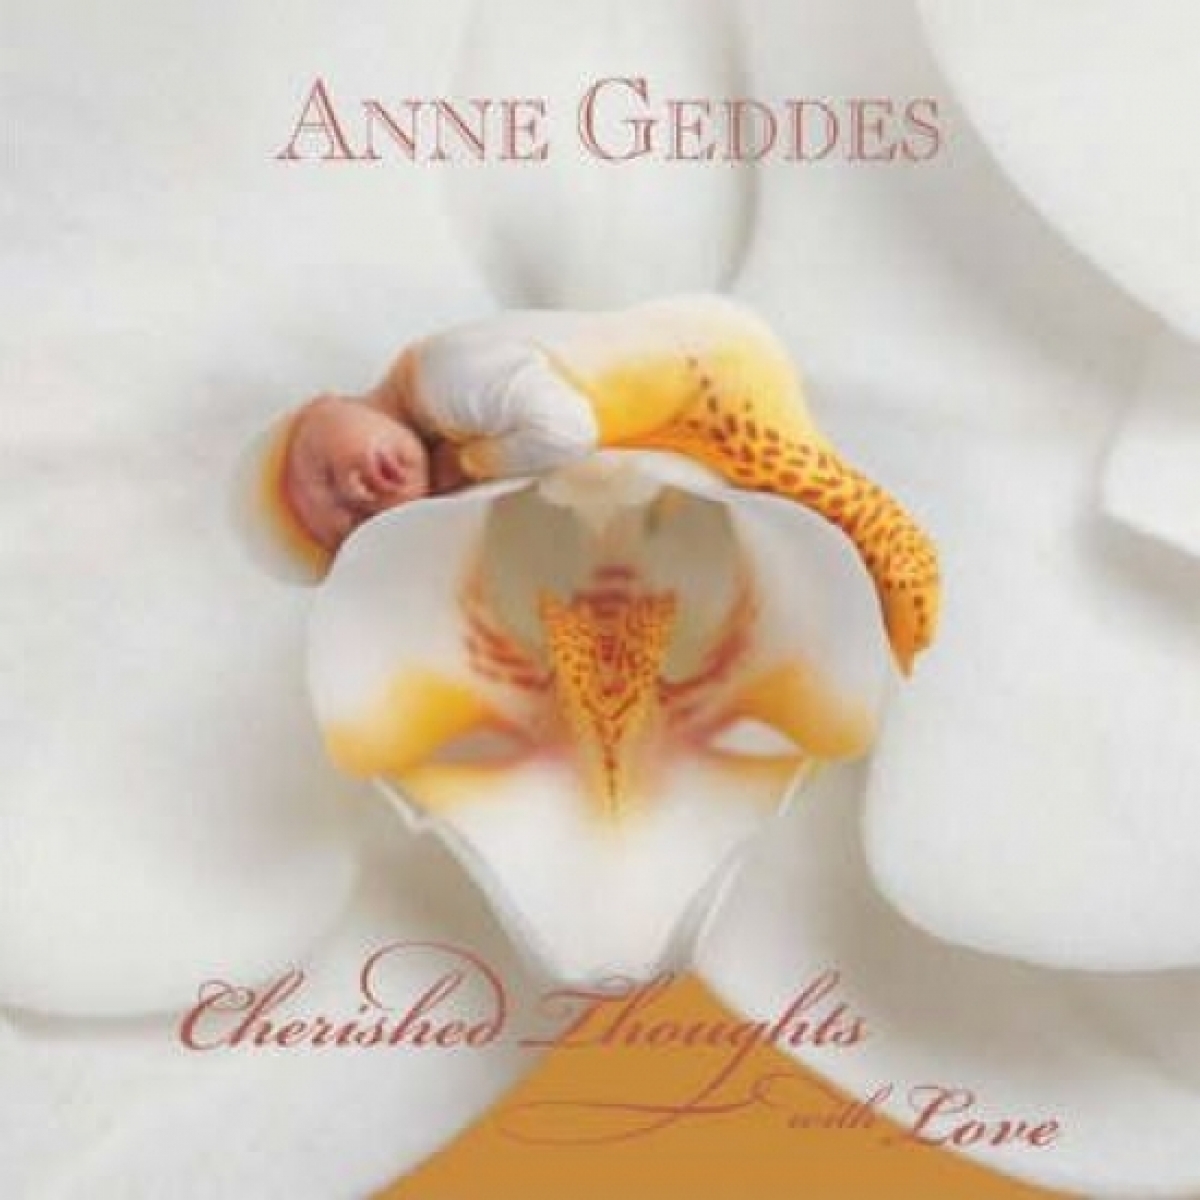 Geddes, Anne Cherished thoughts and love 